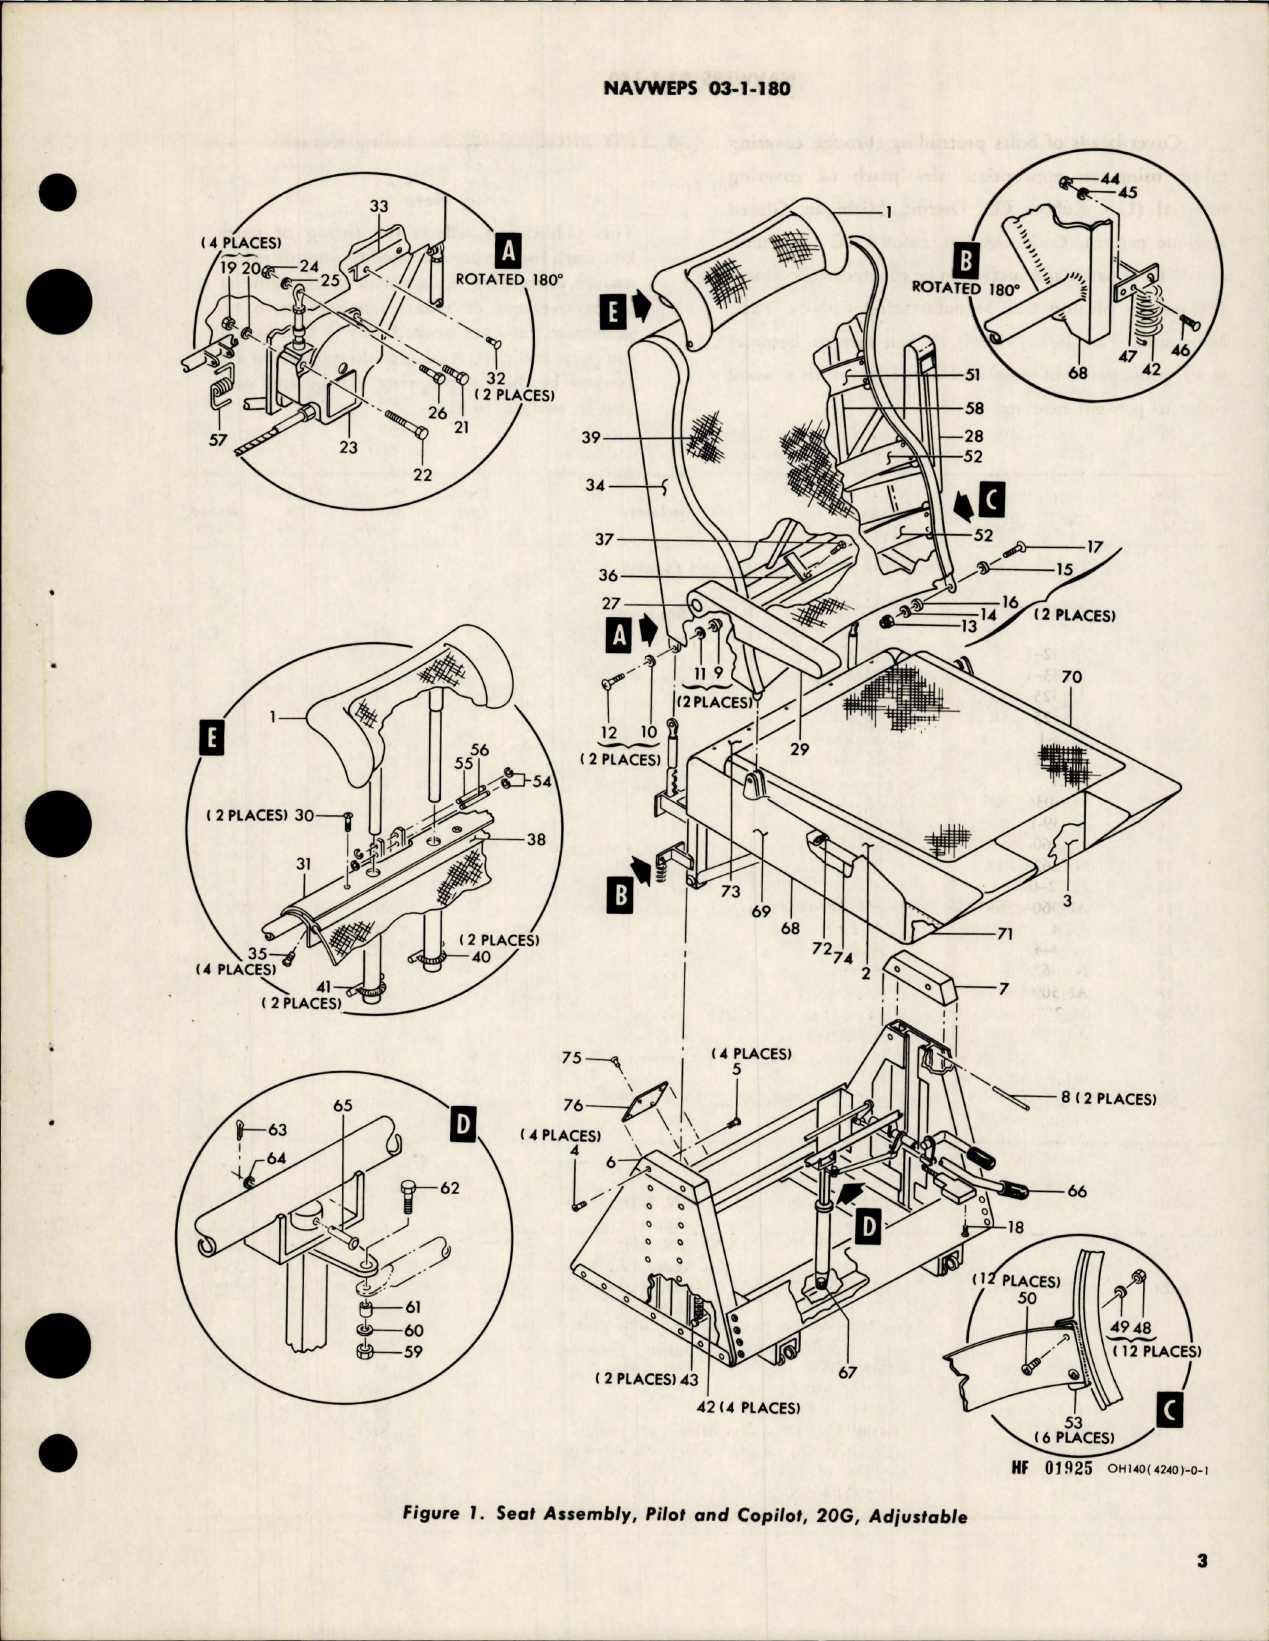 Sample page 5 from AirCorps Library document: Overhaul Instructions with Parts for Pilots, Copilots and Captains Seat Assemblies - Parts 4240-5 and 4245-5 